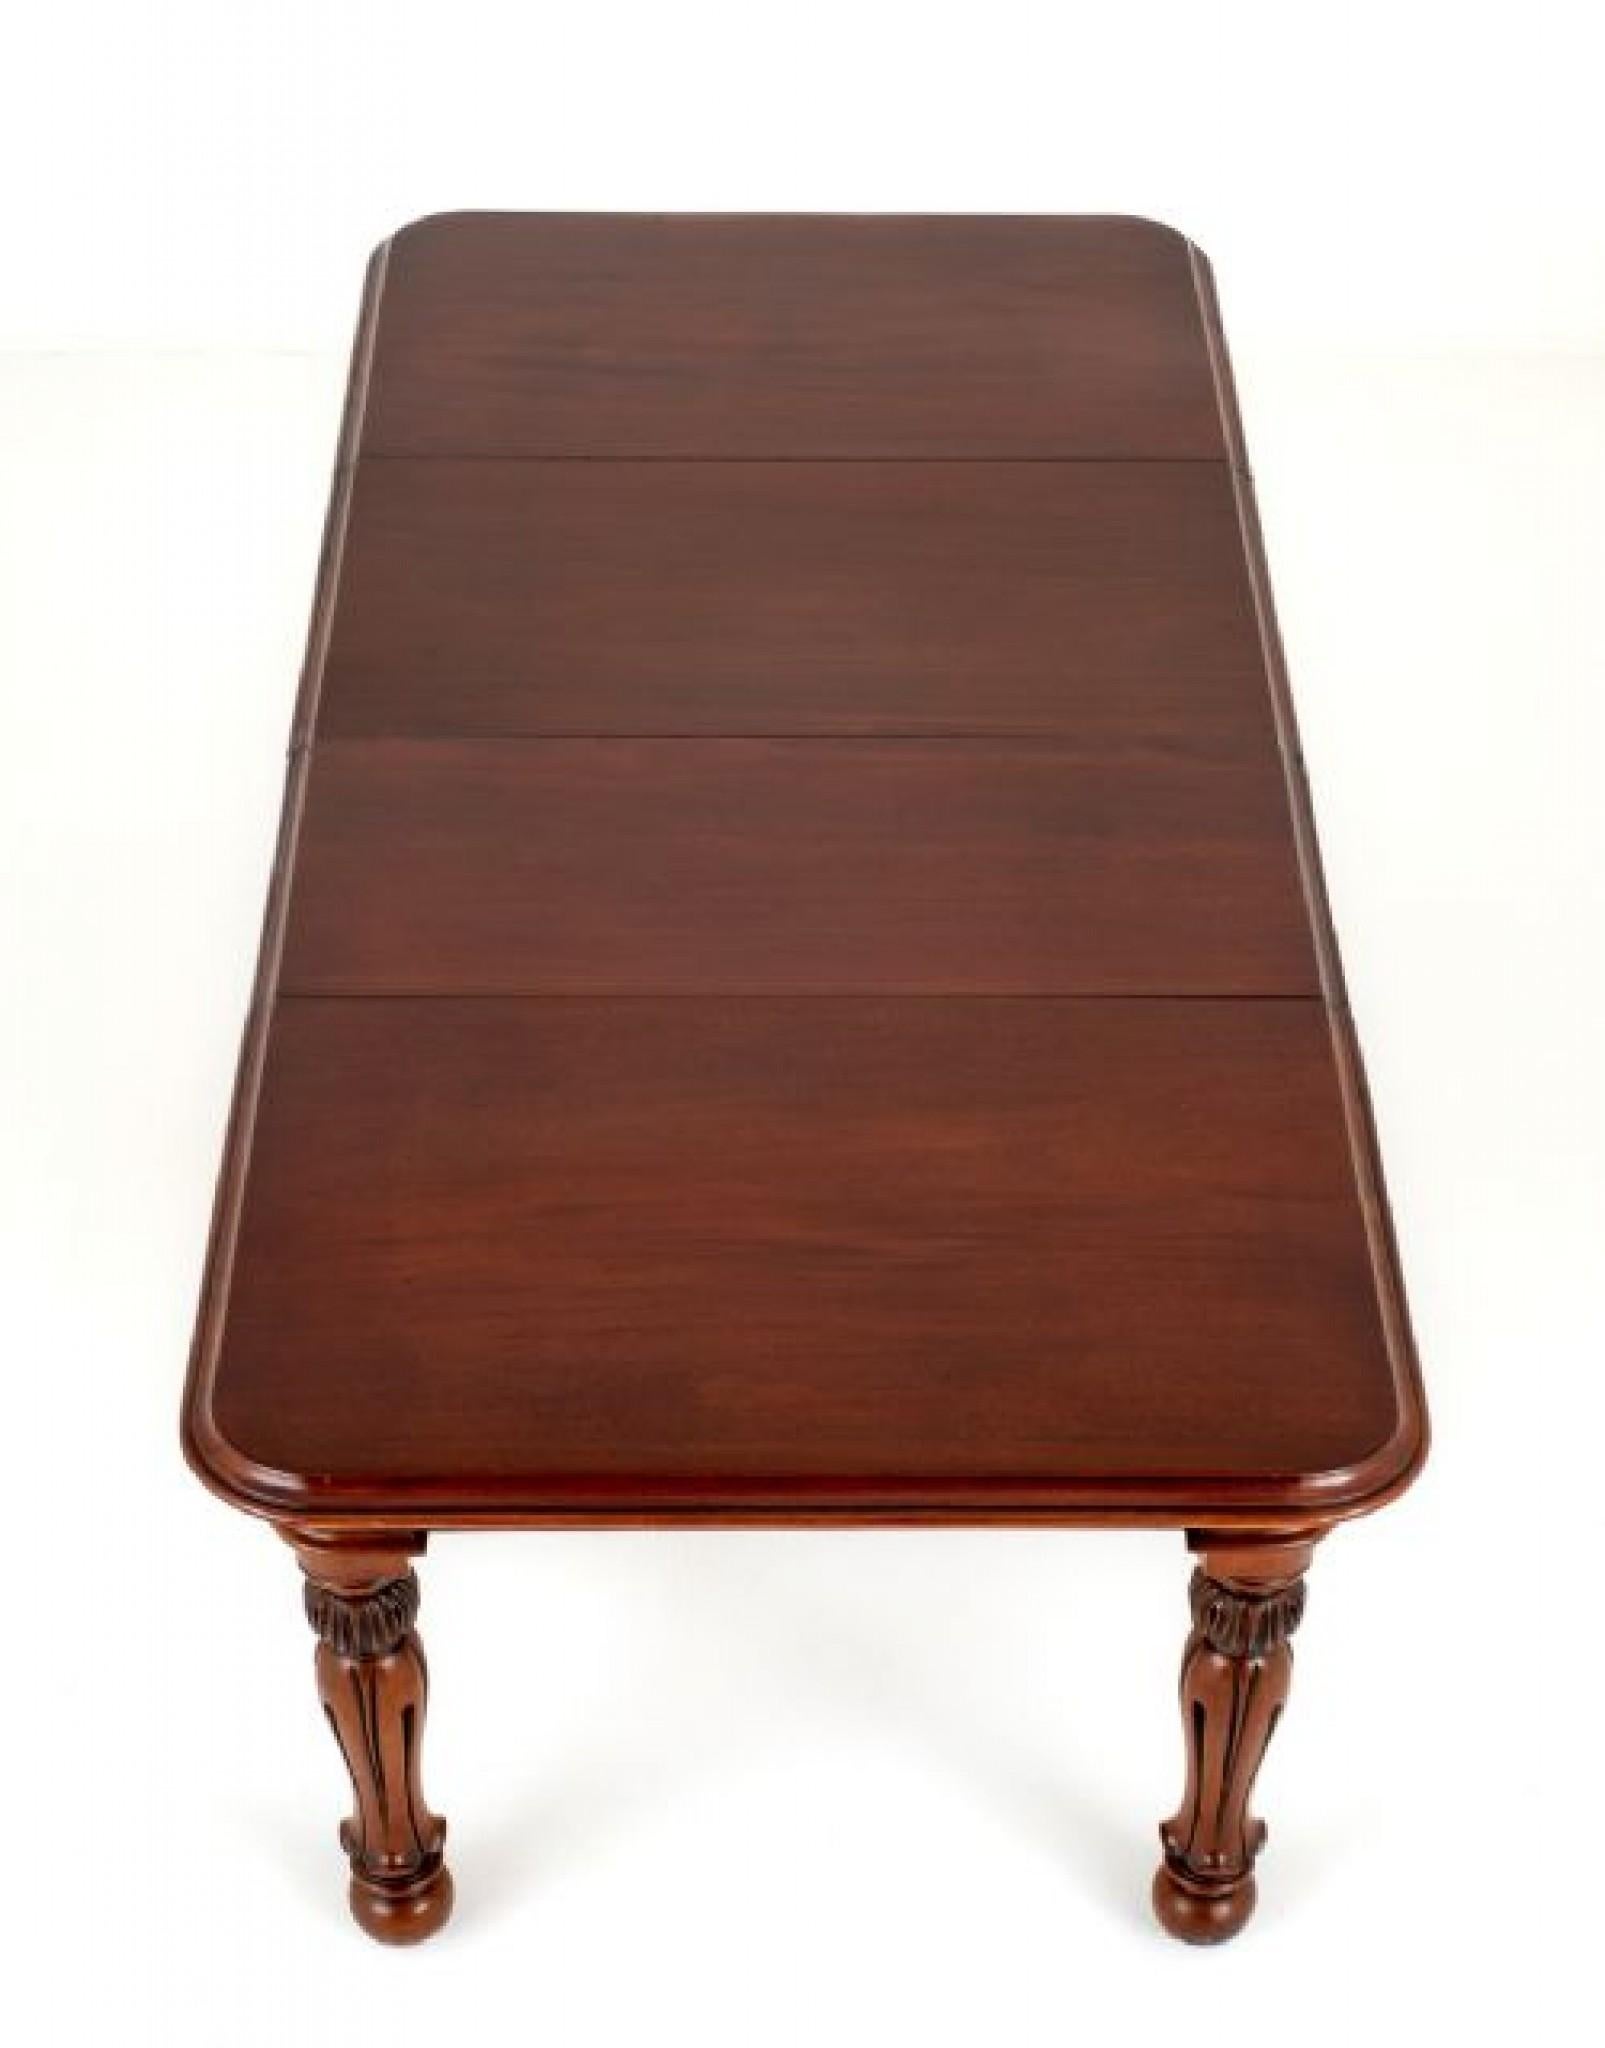 Victorian Dining Table Extending 2 Leaf Mahogany 1860 For Sale 4